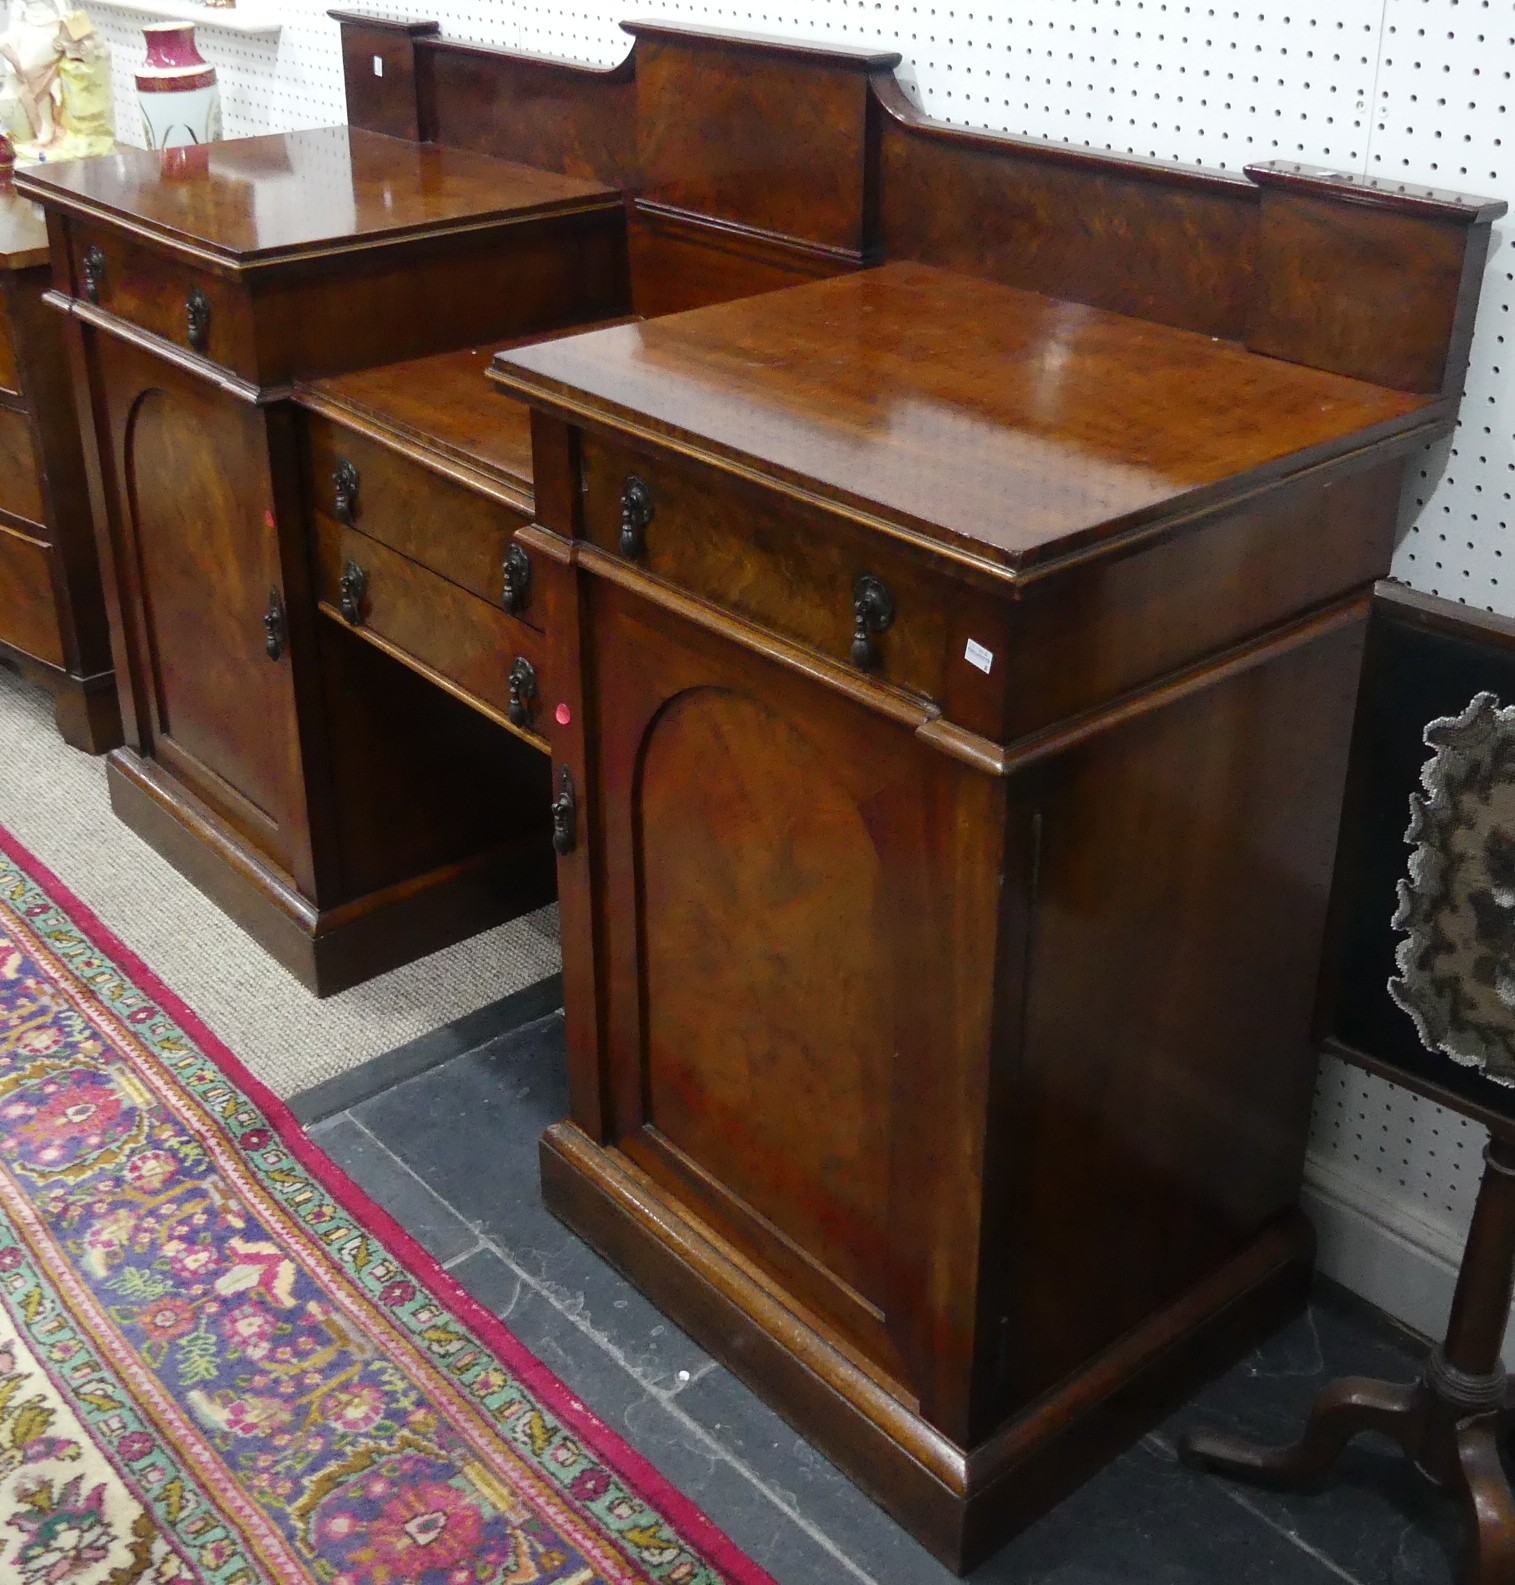 An Edwardian mahogany breakfront Sideboard, with two central drawers flanked by further drawers - Image 2 of 3